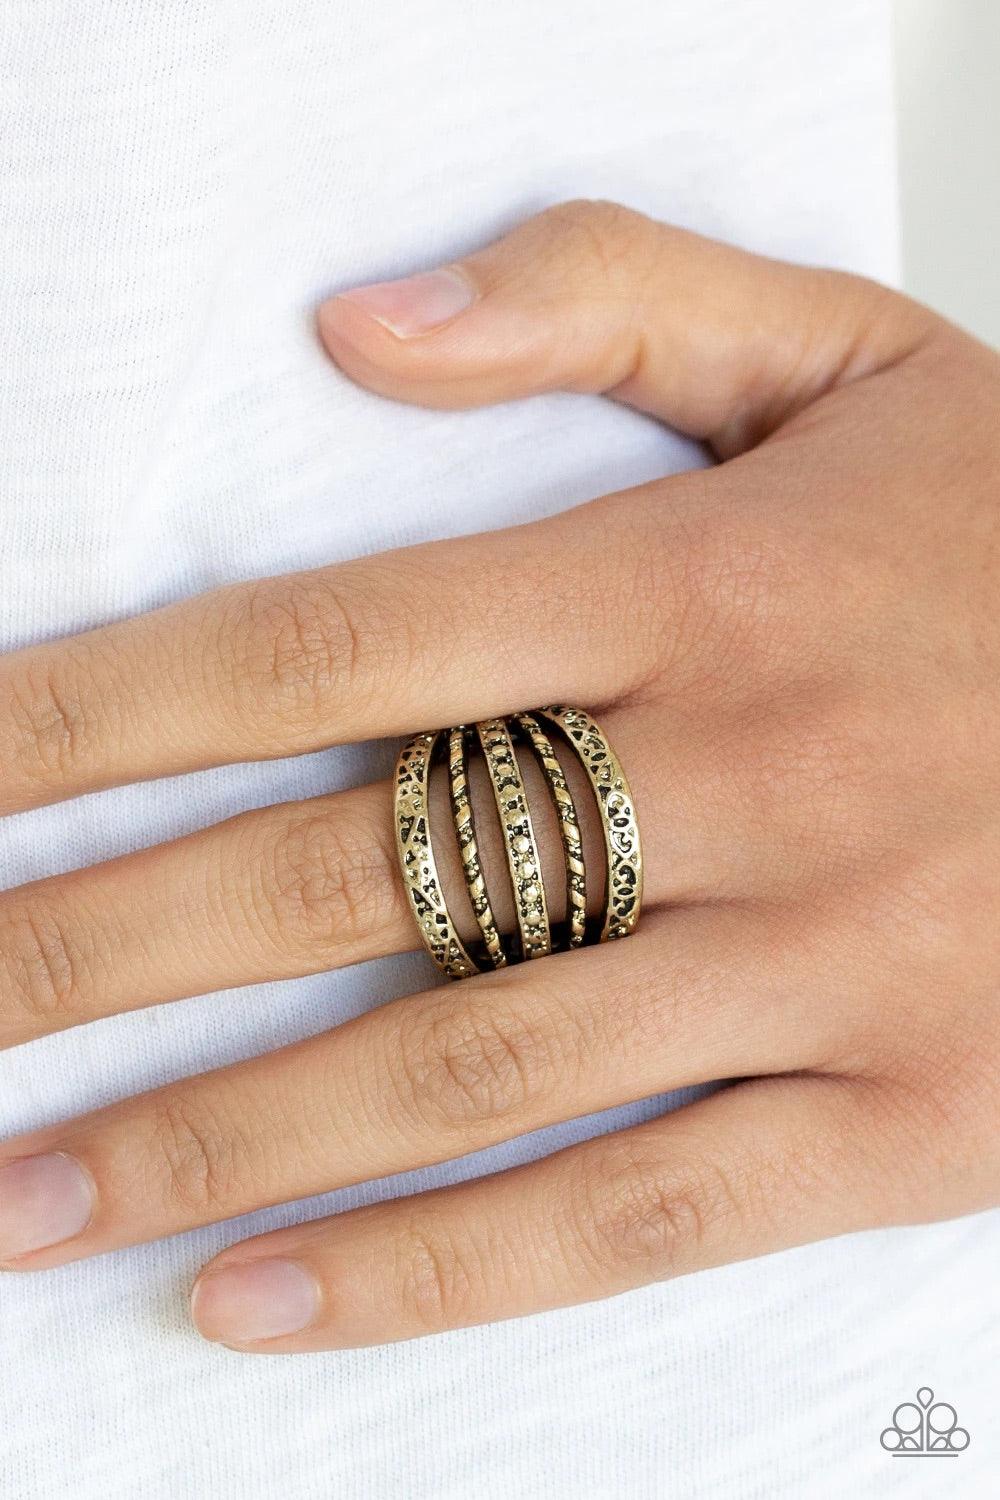 Paparazzi Accessories Textile Bliss - Brass Featuring studded, embossed, and hammered accents, mismatched brass bands stack across the finger for a casual look. Features a stretchy band for a flexible fit. Sold as one individual ring. Jewelry